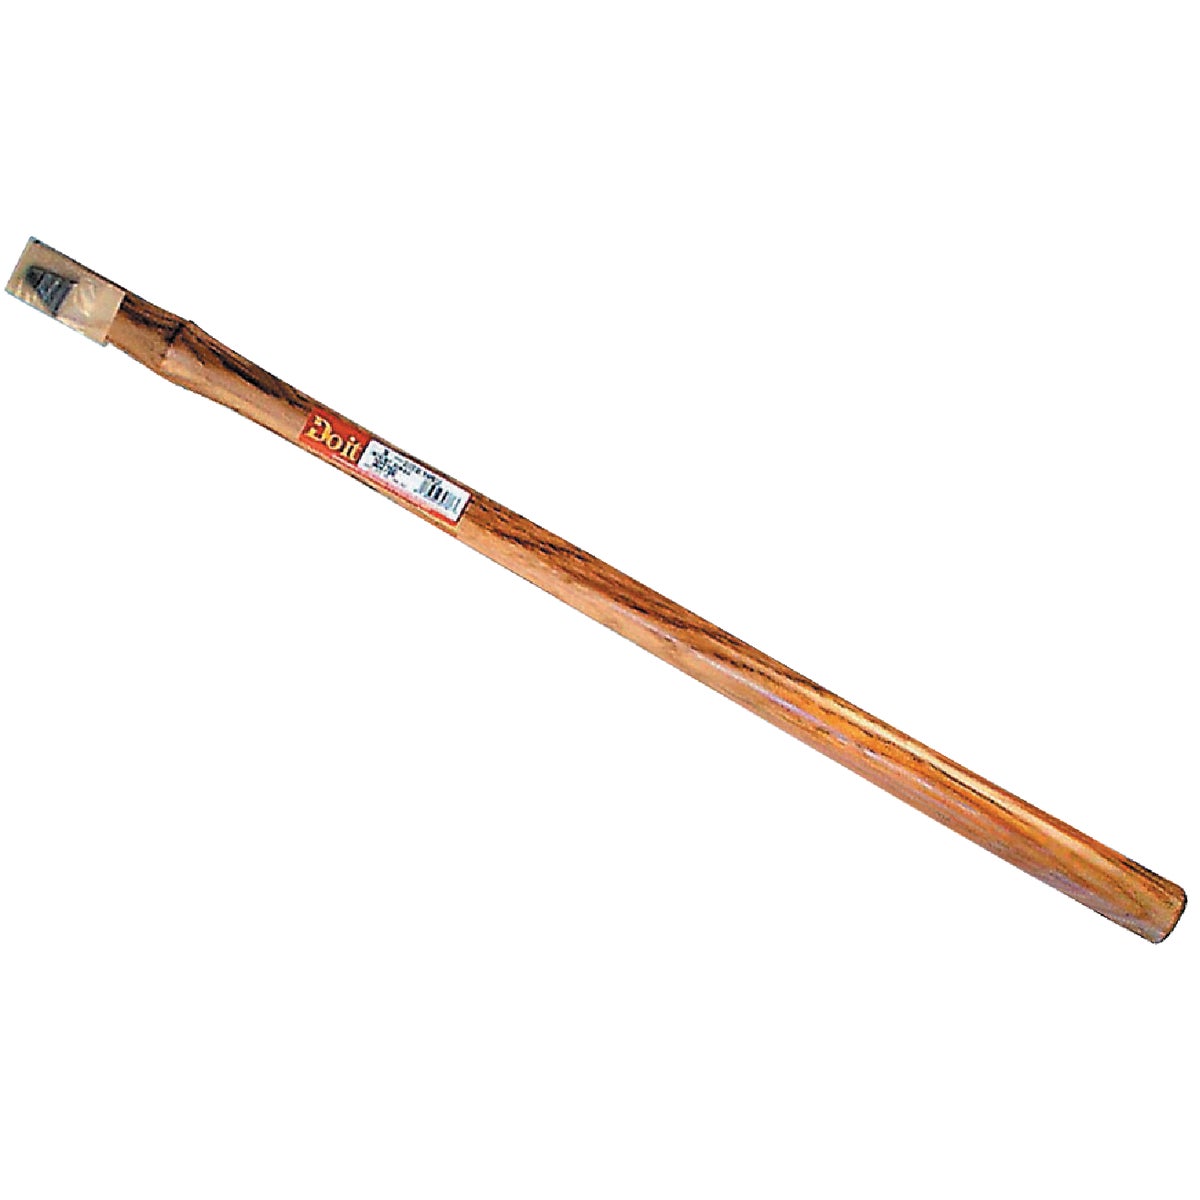 Item 302700, Durable handle for use on sledge hammers from 6 to 16 pounds.